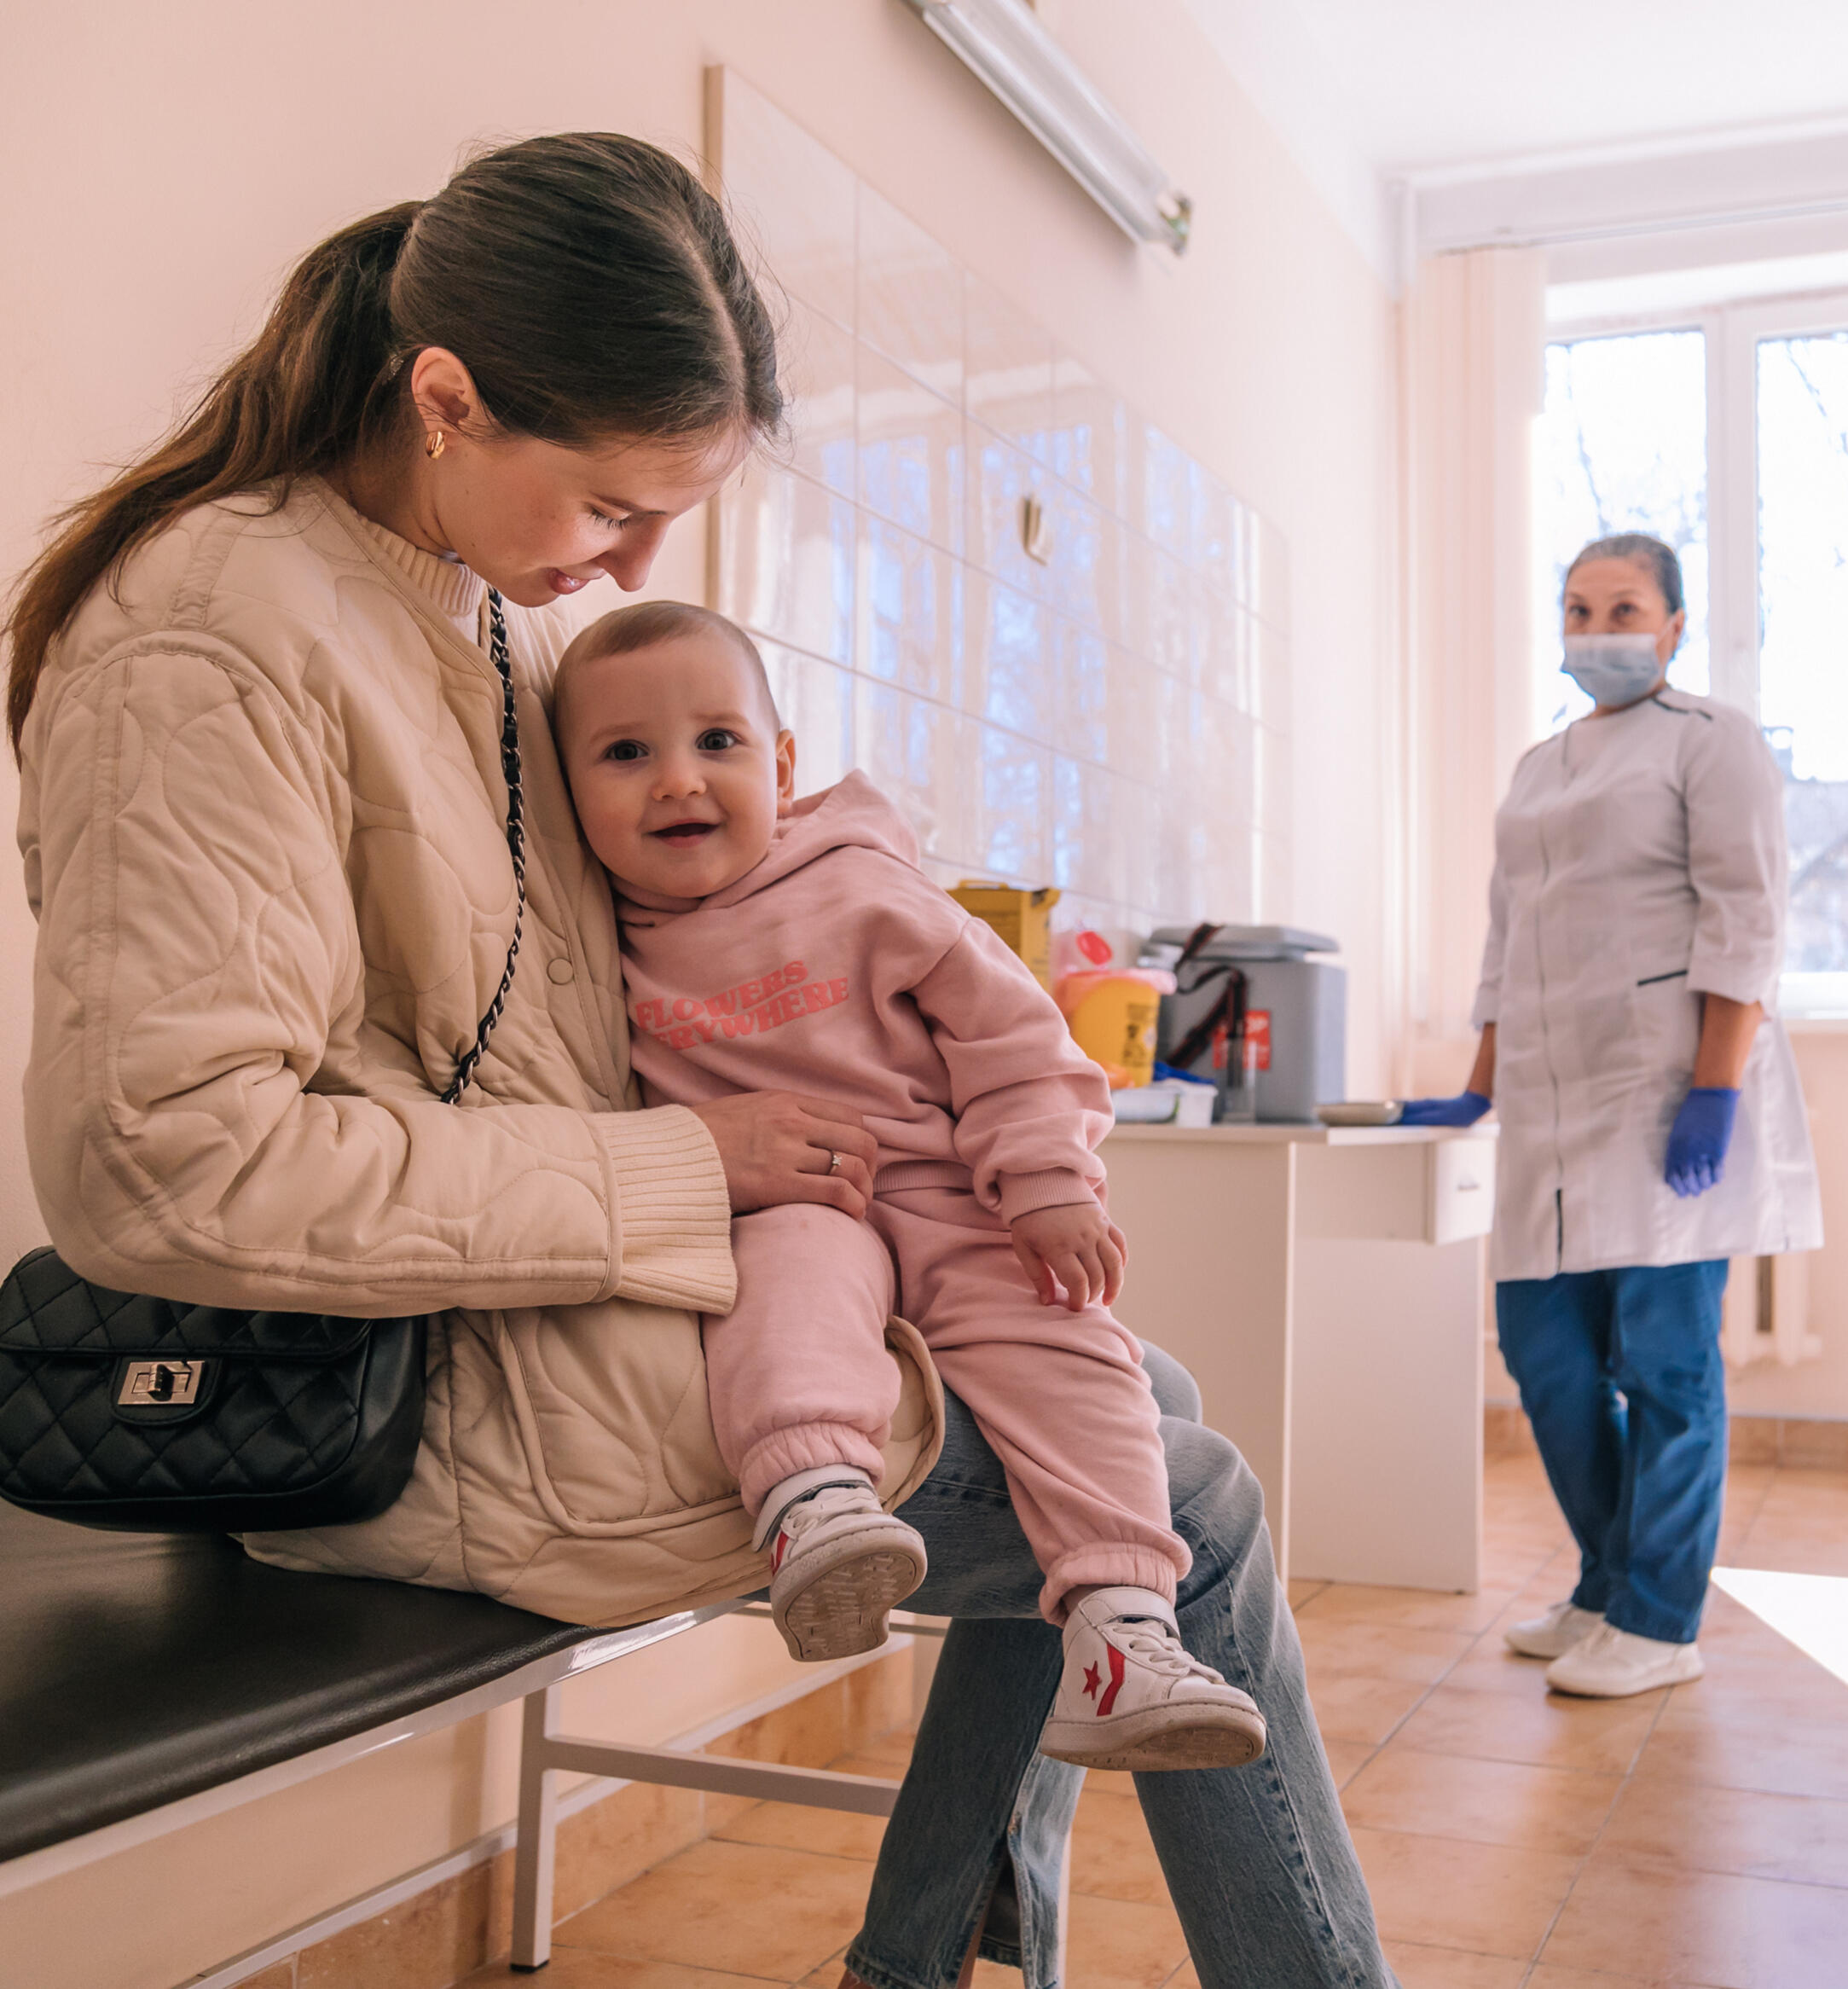 March 14, 2023, Odesa, Ukraine. Little one-year-old Vira came to Odesa City Children's Polyclinic No. 4 with her mother Oleksandra in order to have her routine vaccination in her leg.